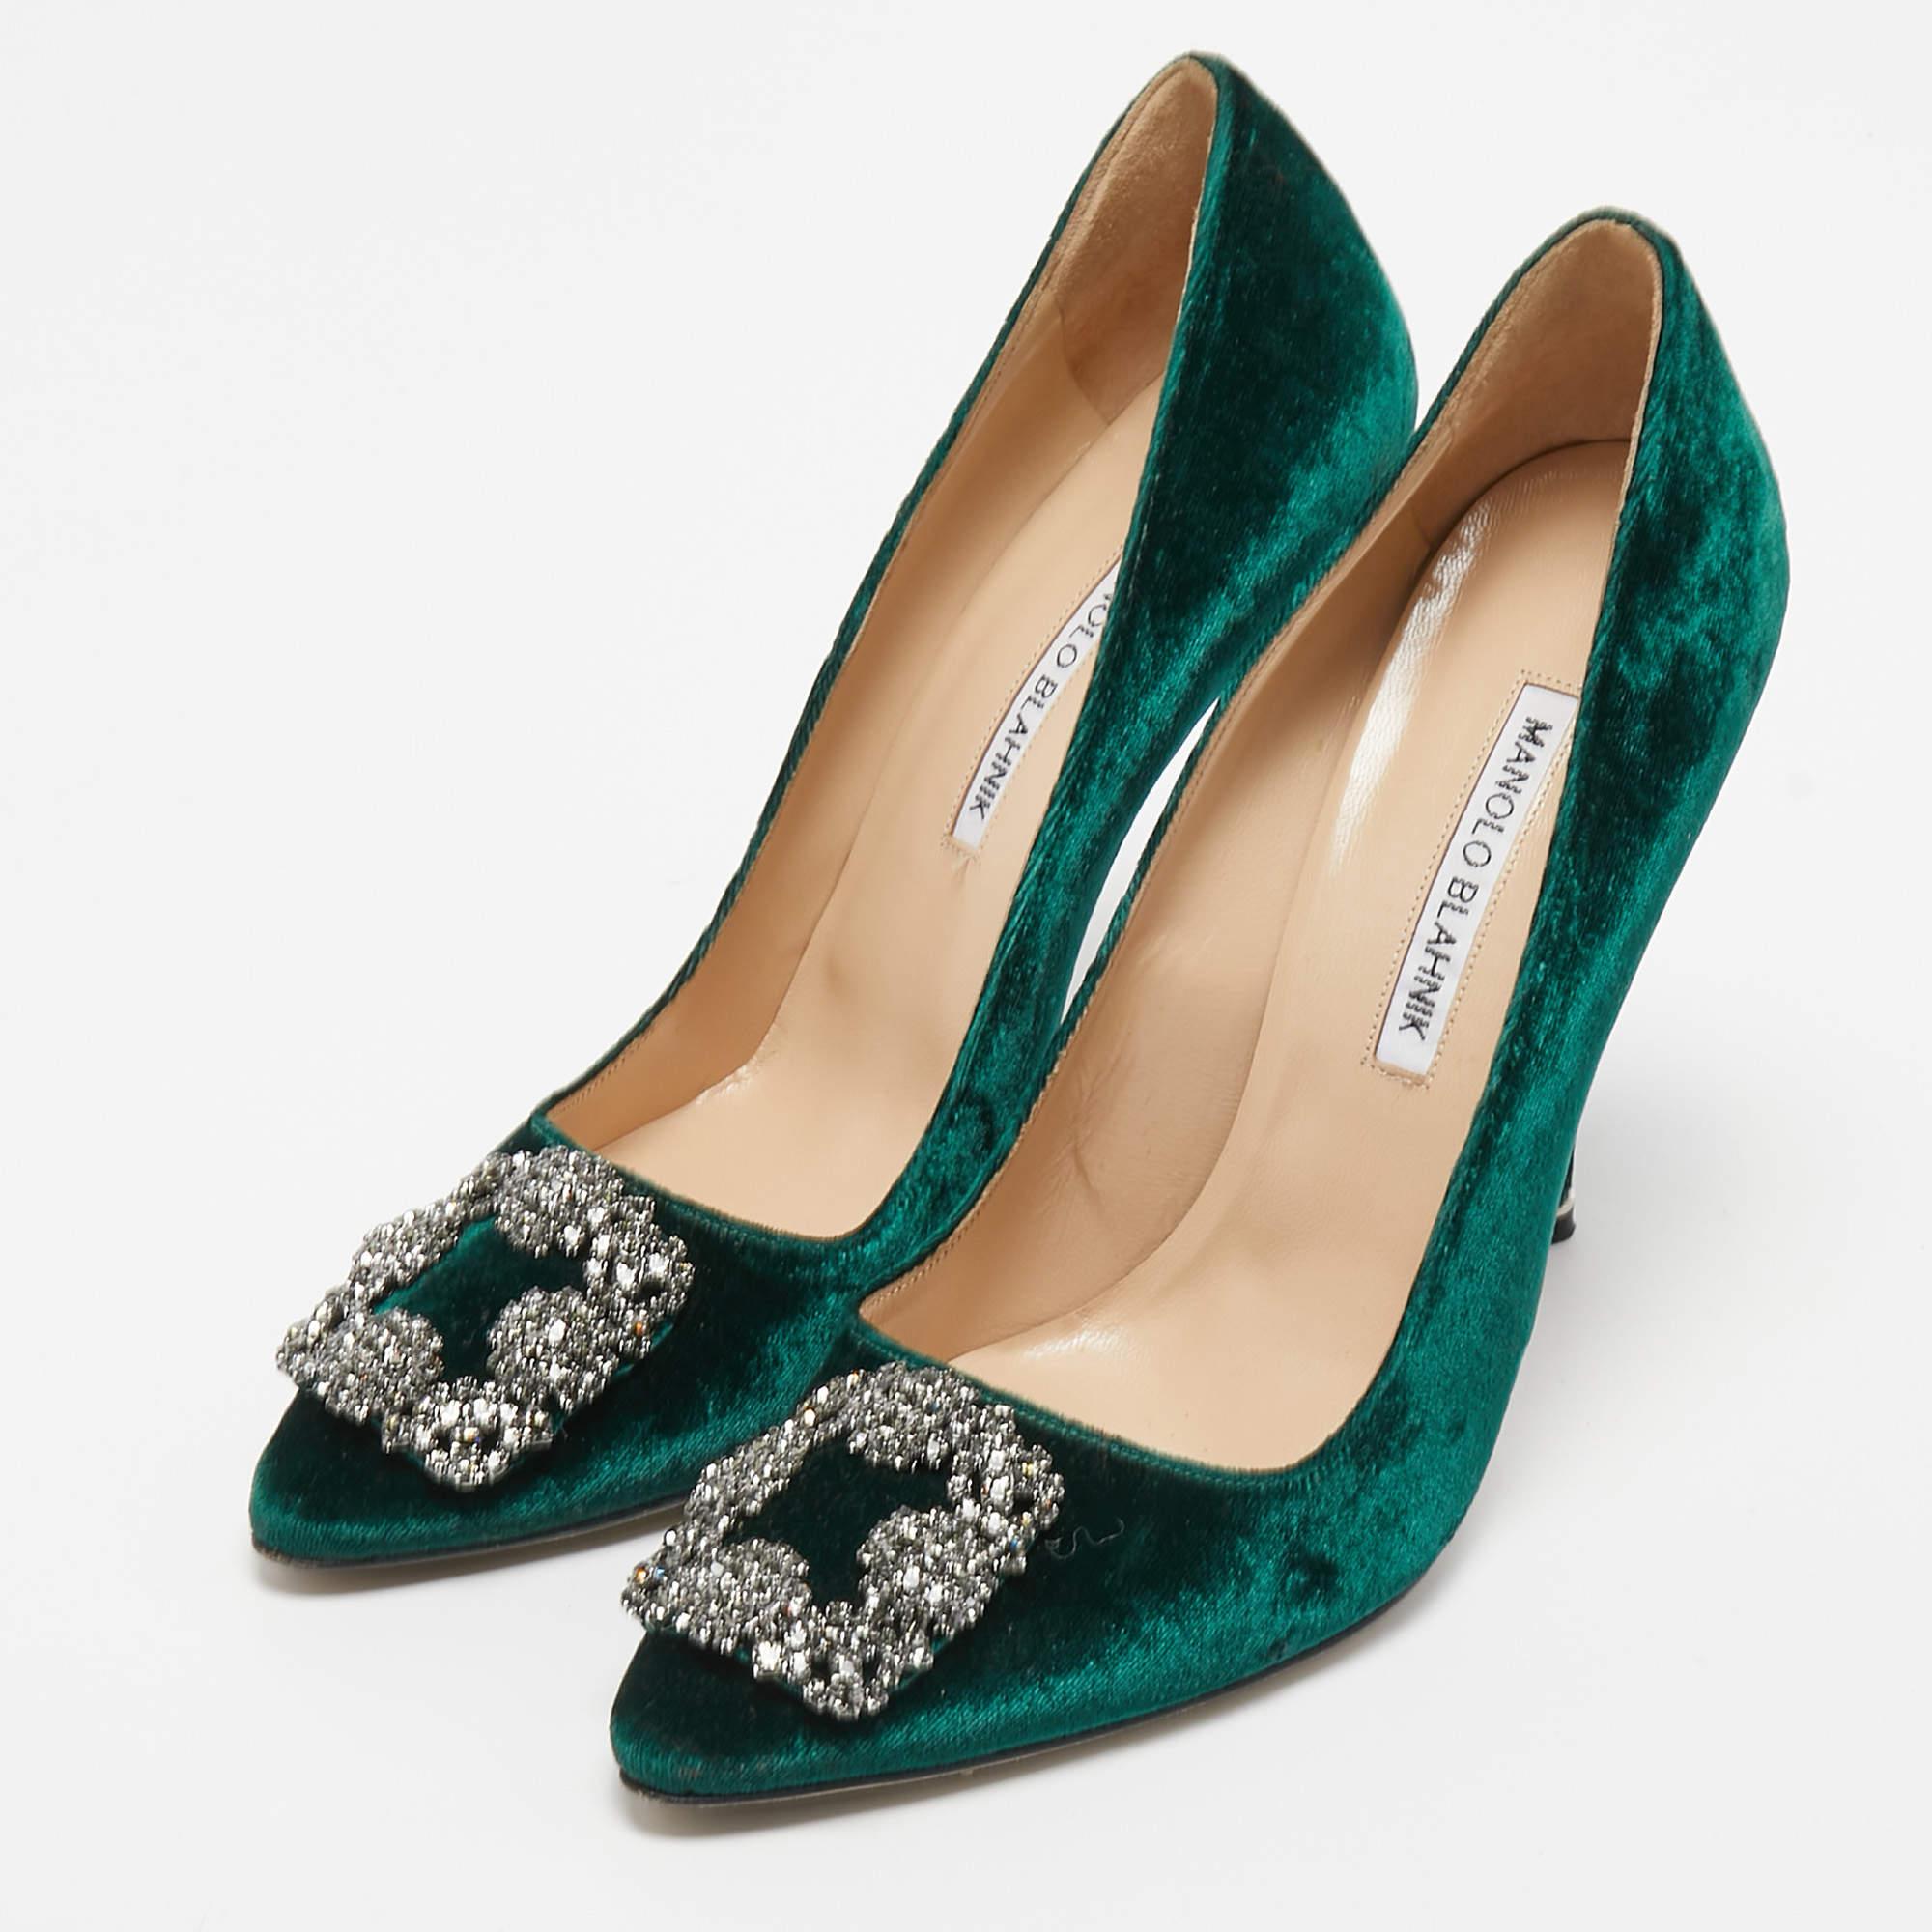 The fashion house’s tradition of excellence, coupled with modern design sensibilities, works to make these Manolo Blahnik pumps a fabulous choice. They'll help you deliver a chic look with ease.

Includes: Original Box, Info Booklet